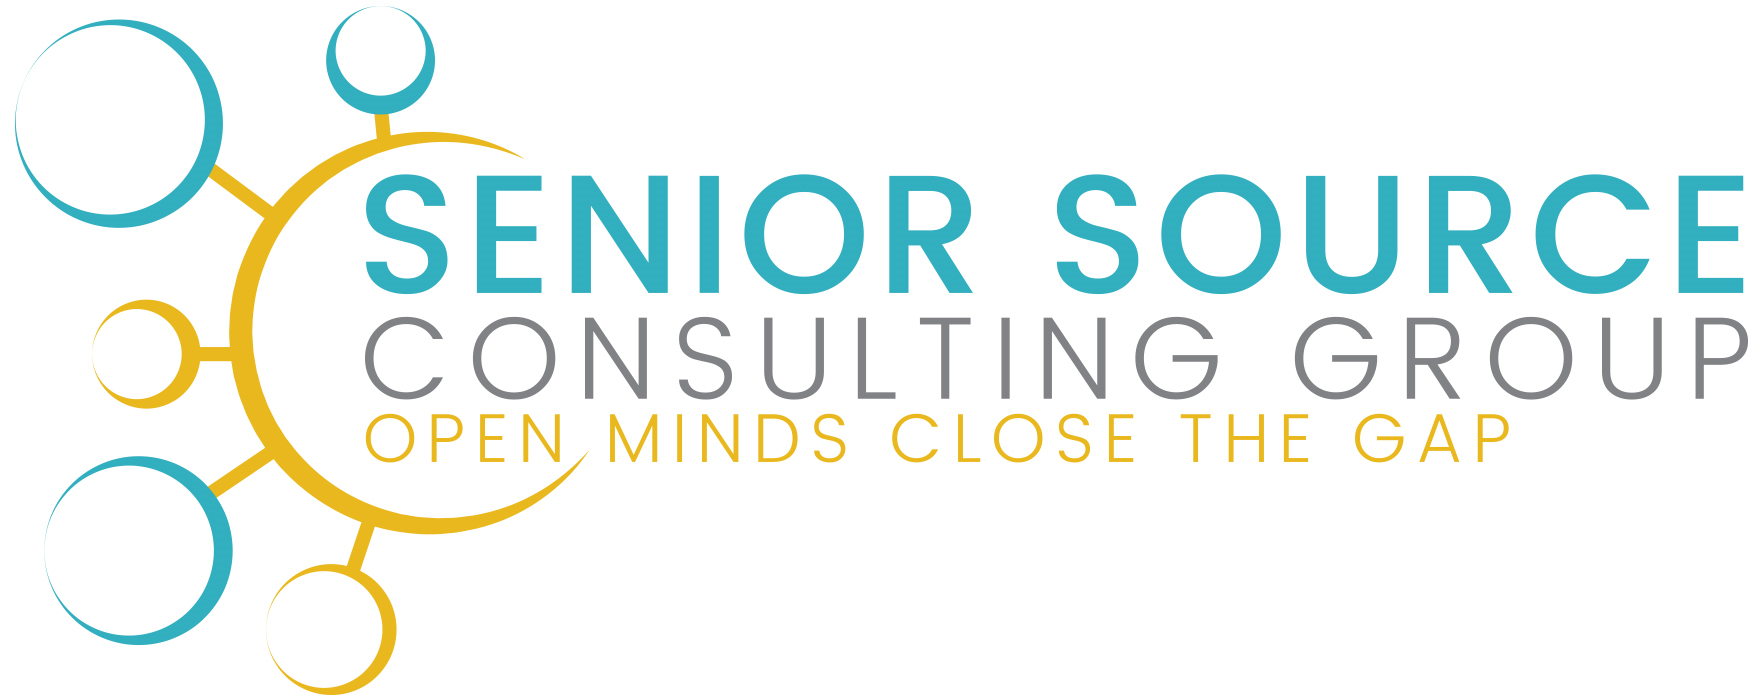 Senior Source Consulting Group